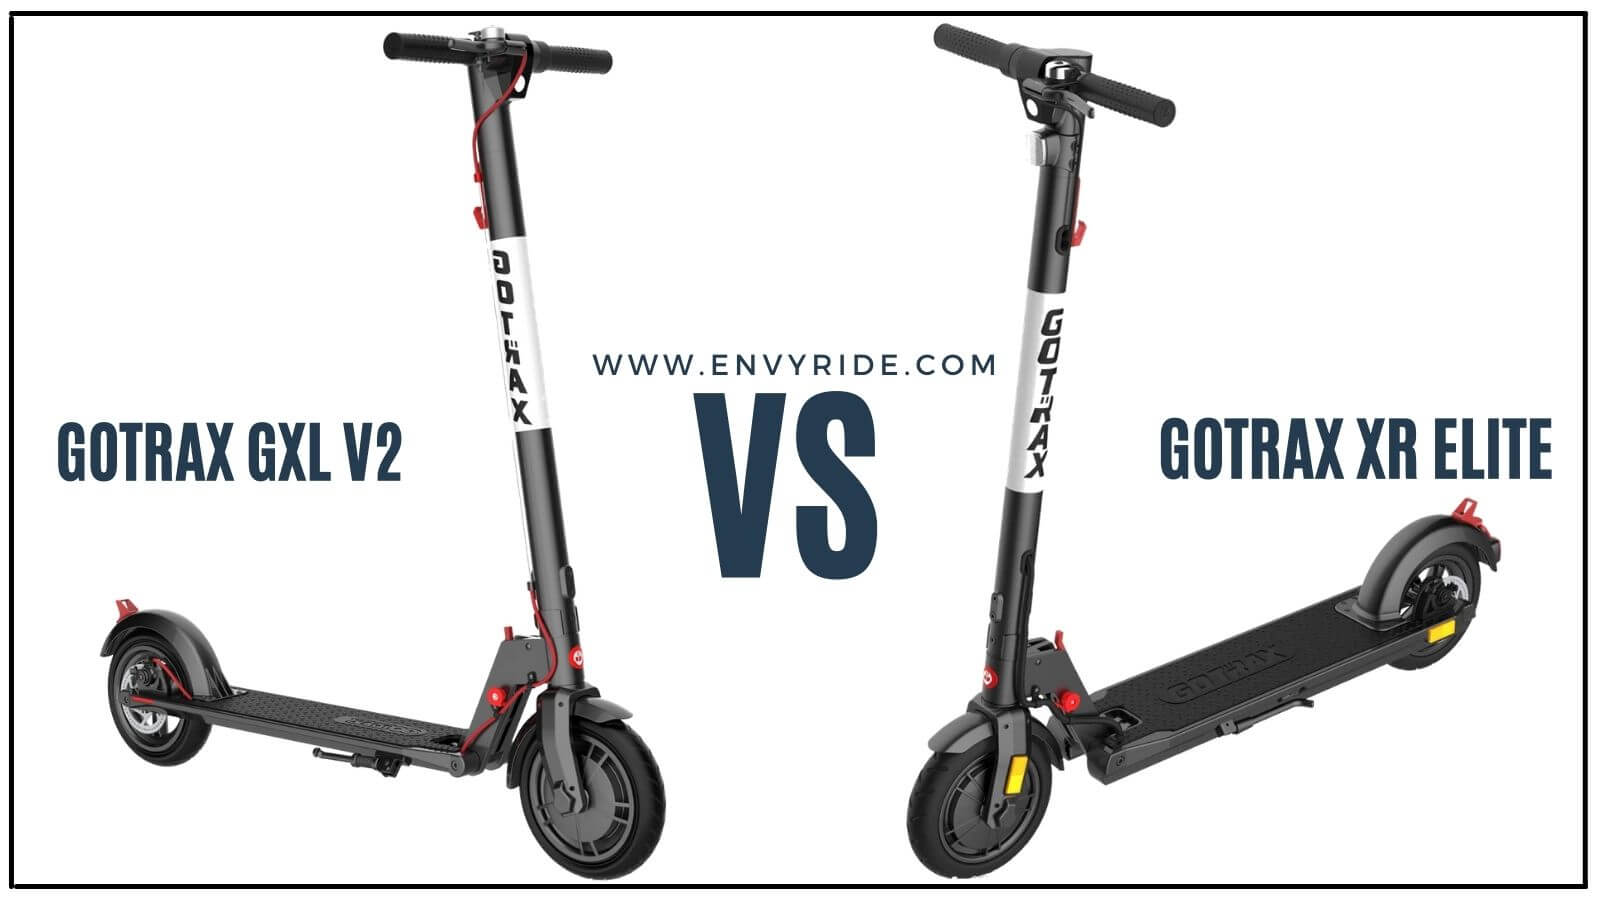 Electric scooters are all the rage, but are they for you? Check out the major differences between the GoTrax XR Elite vs. GXL V2